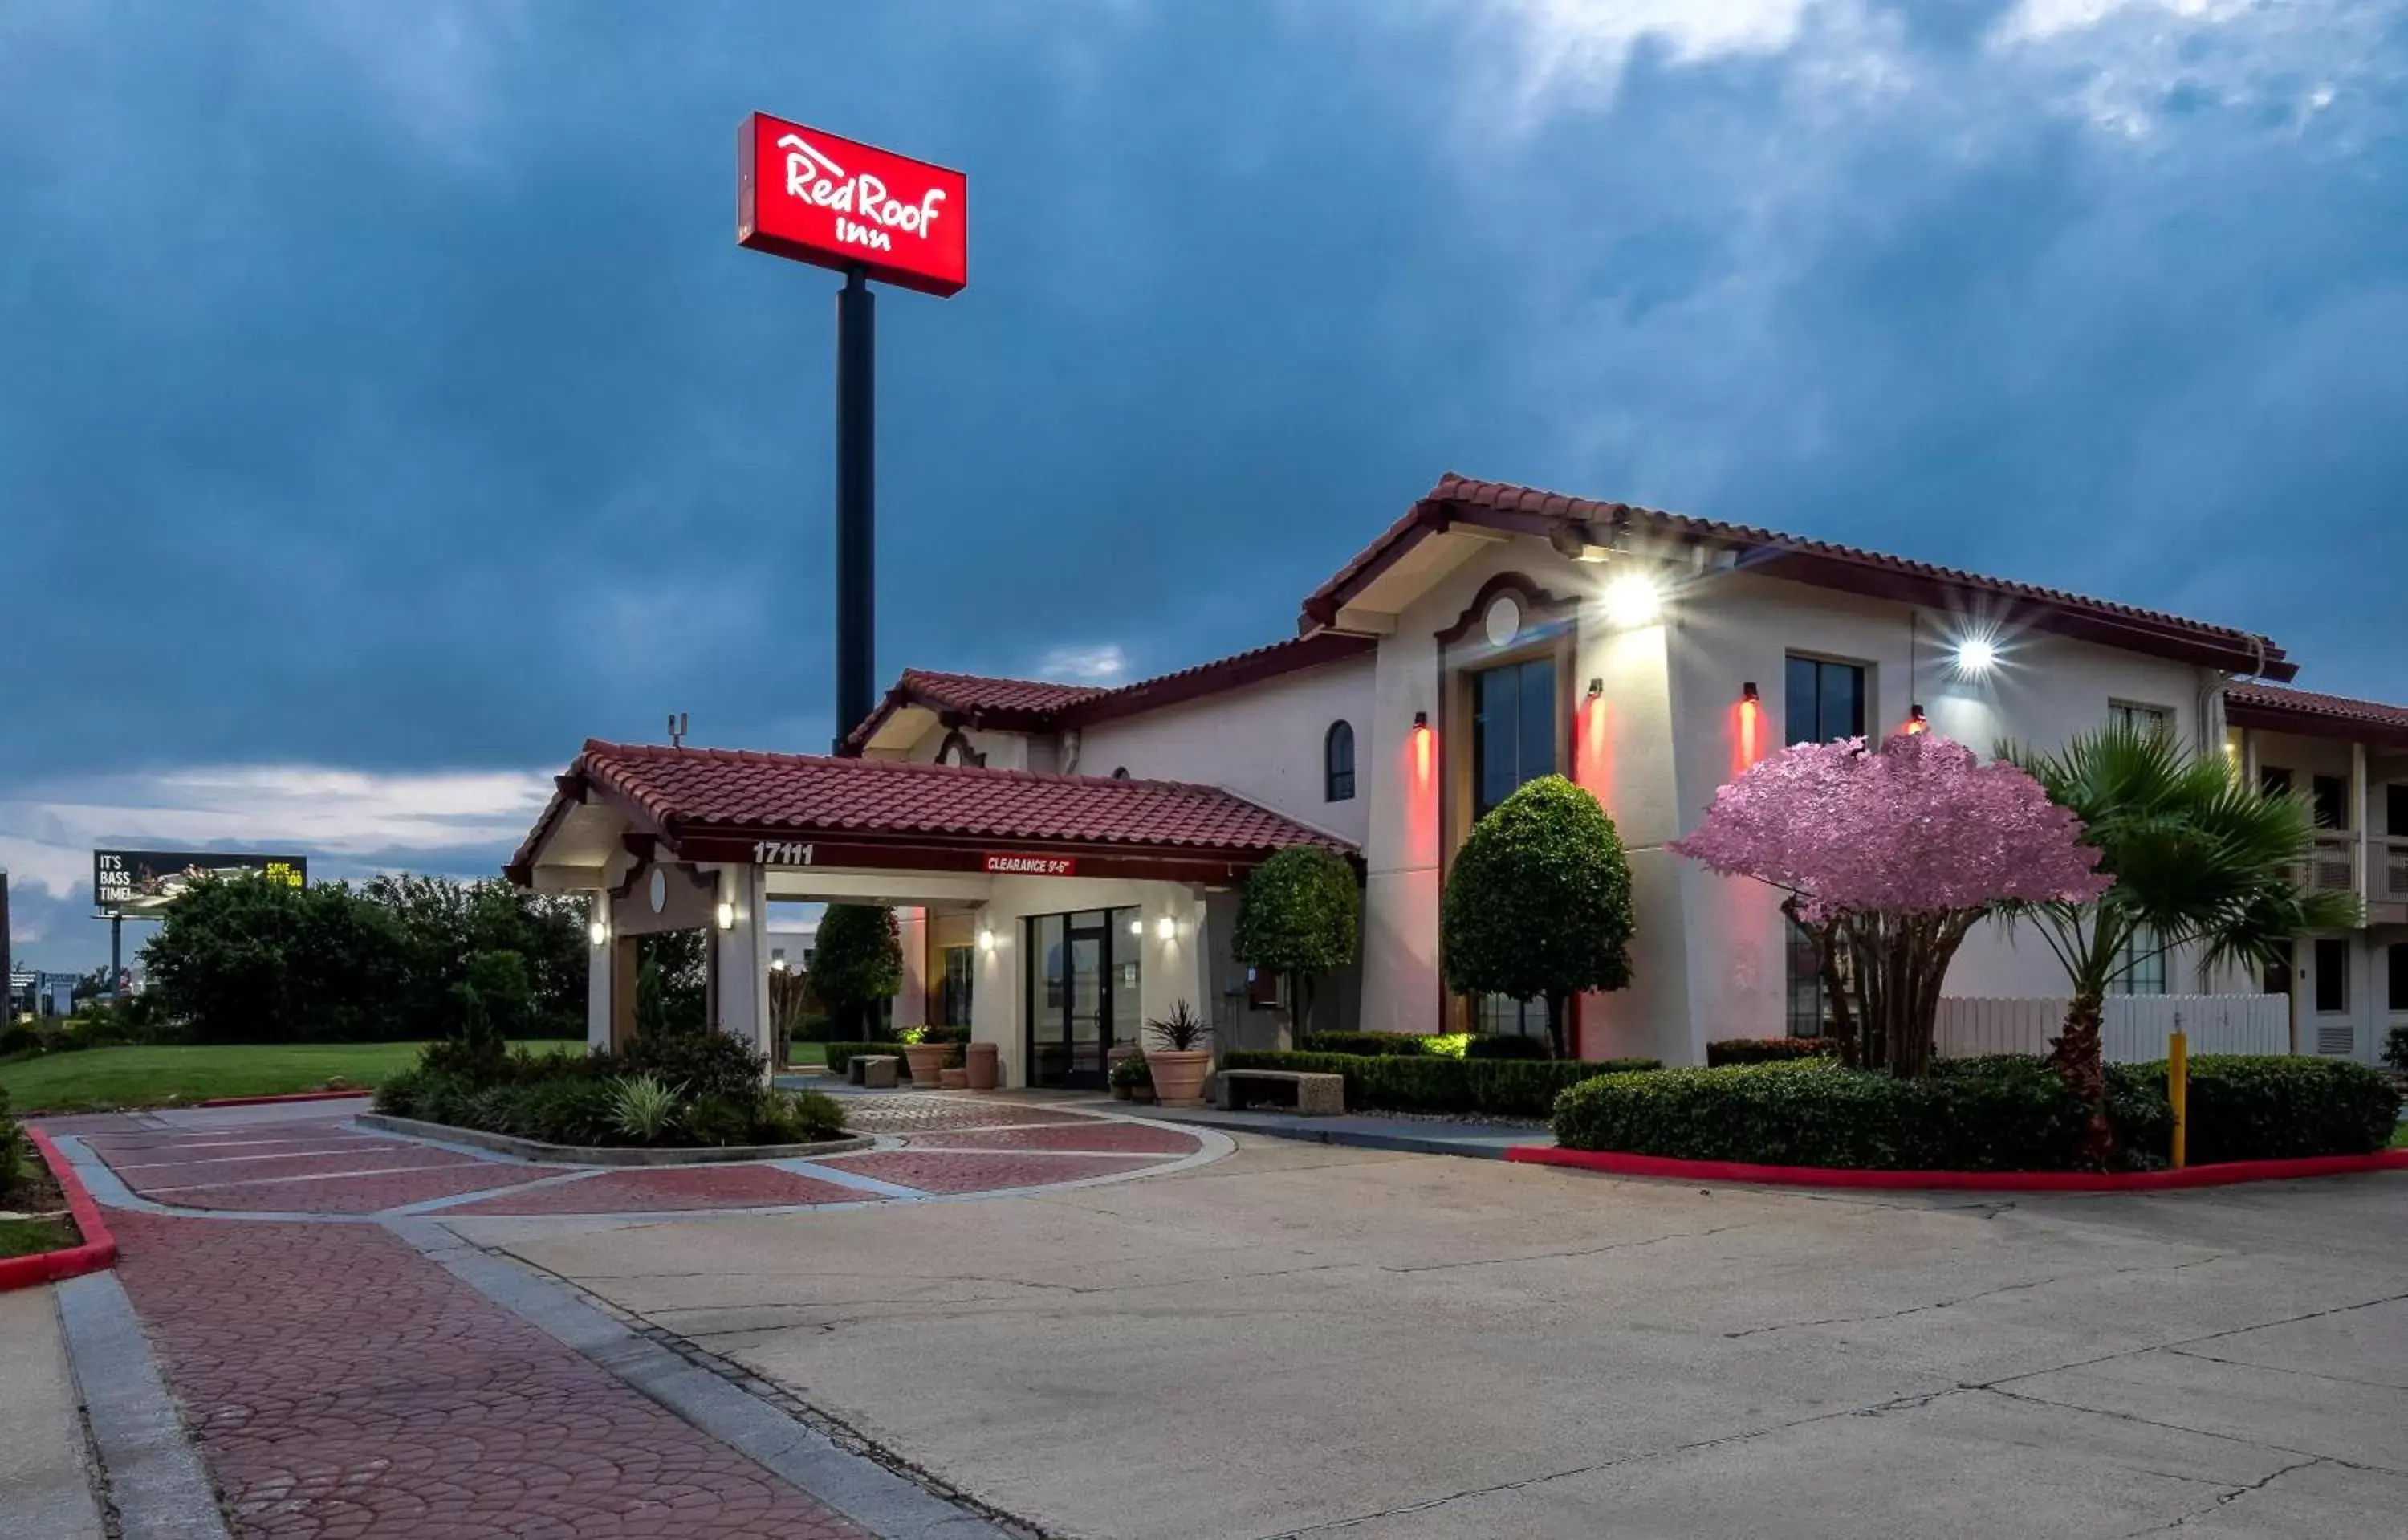 Property Building in Red Roof Inn Houston North - FM1960 & I-45